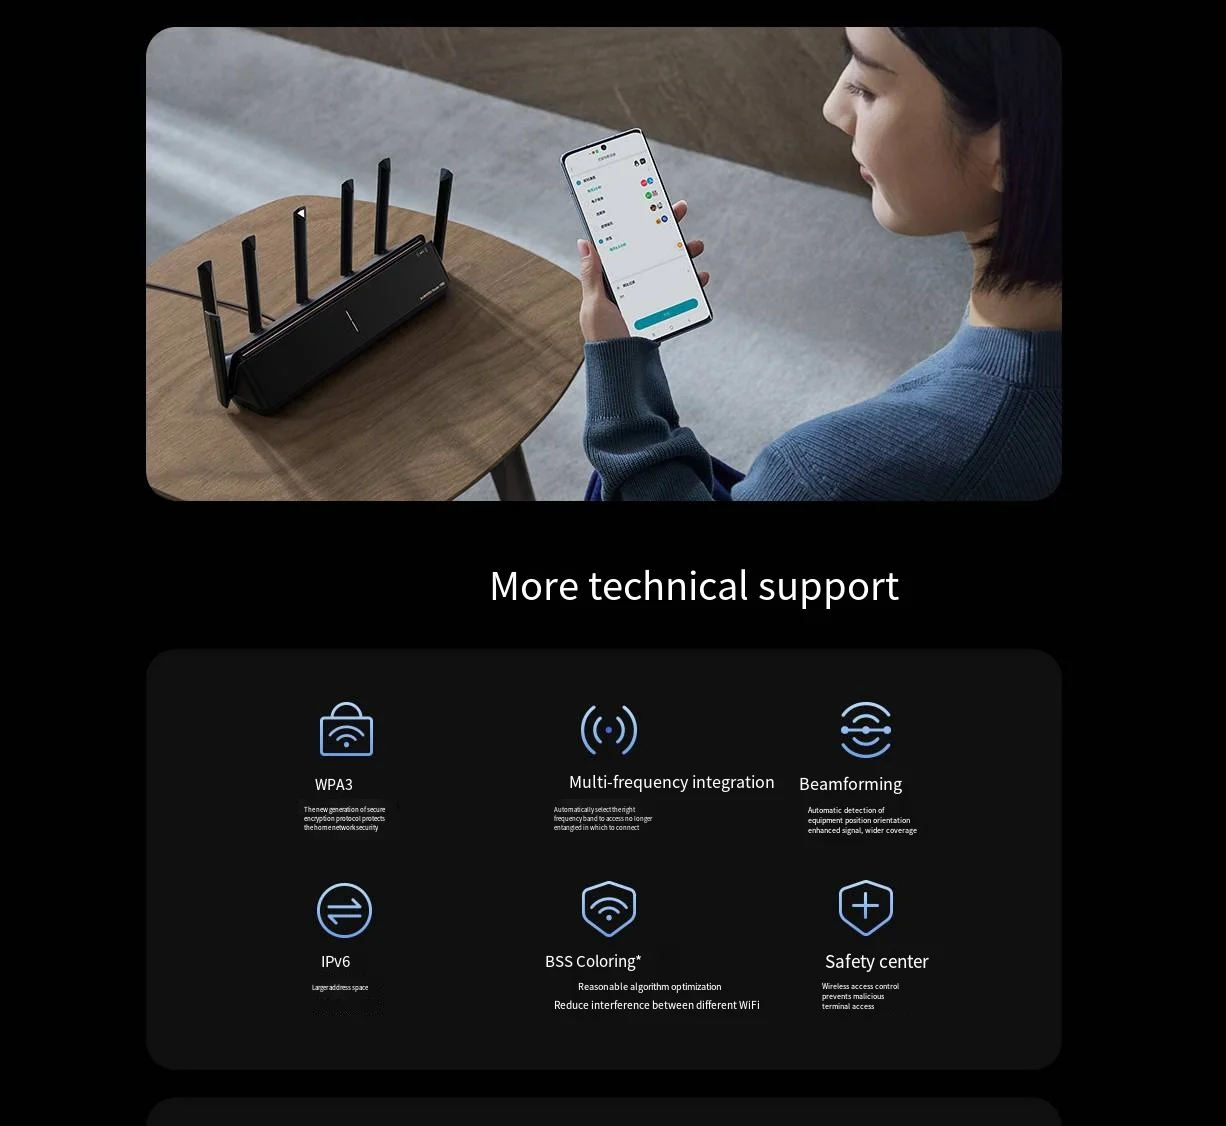 Xiaomi Wifi Router 7000 Signal Booster Repeater Extend Gigabit Amplifier 160MHz 1GB Memory Tri-band Mesh WiMalha Wifi Router Sma